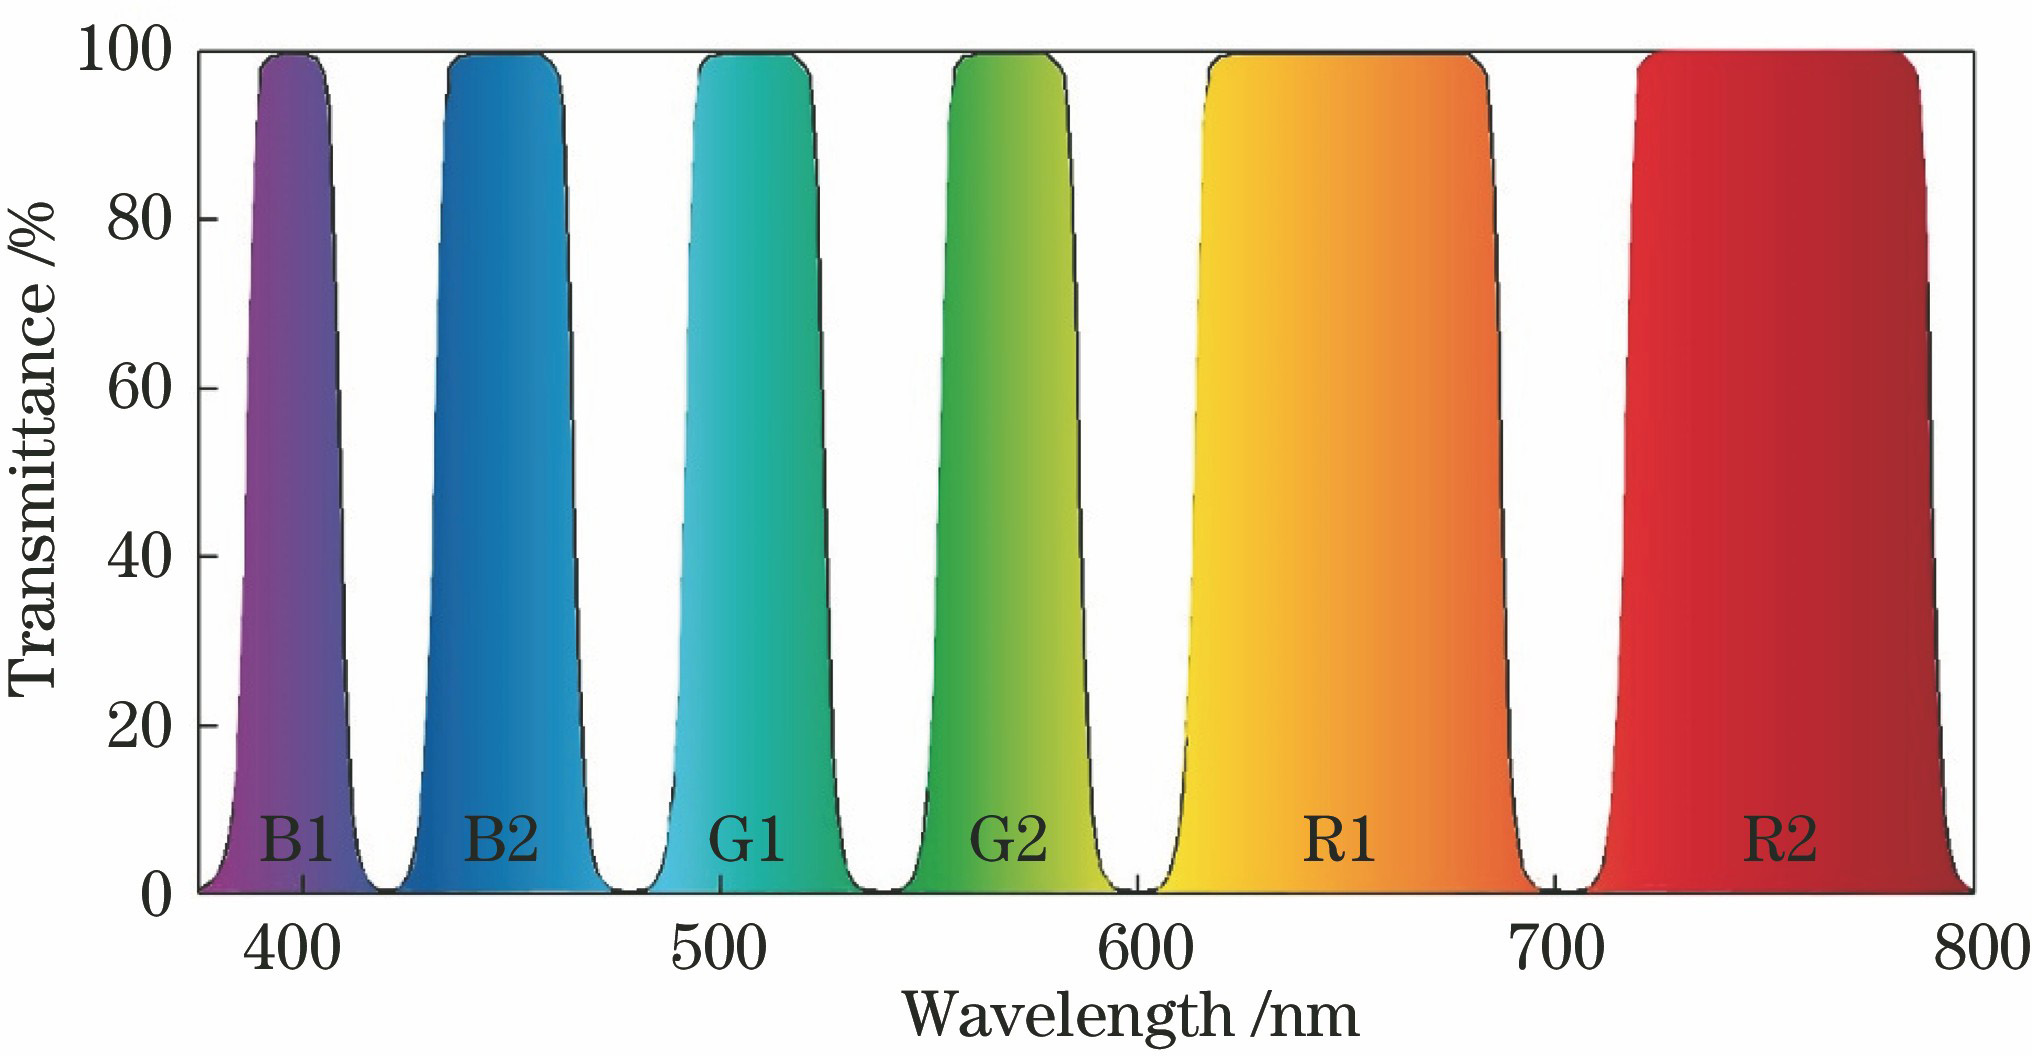 Visible light classified by color spectrum